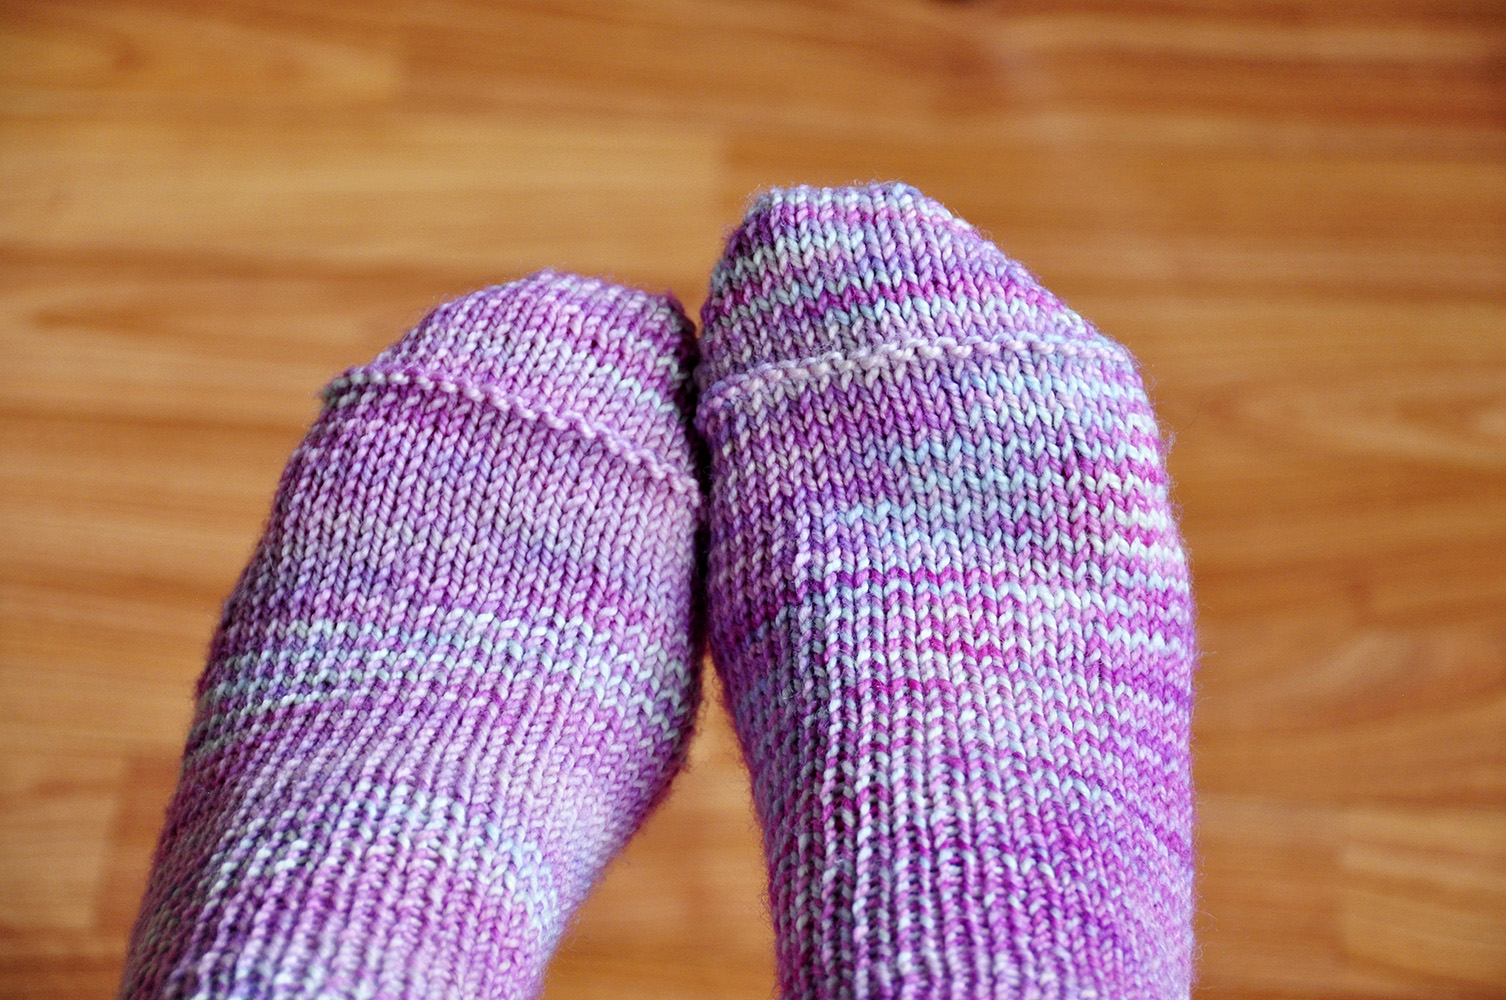 “Young at Heart” Cable Knit Socks with Lace Placket